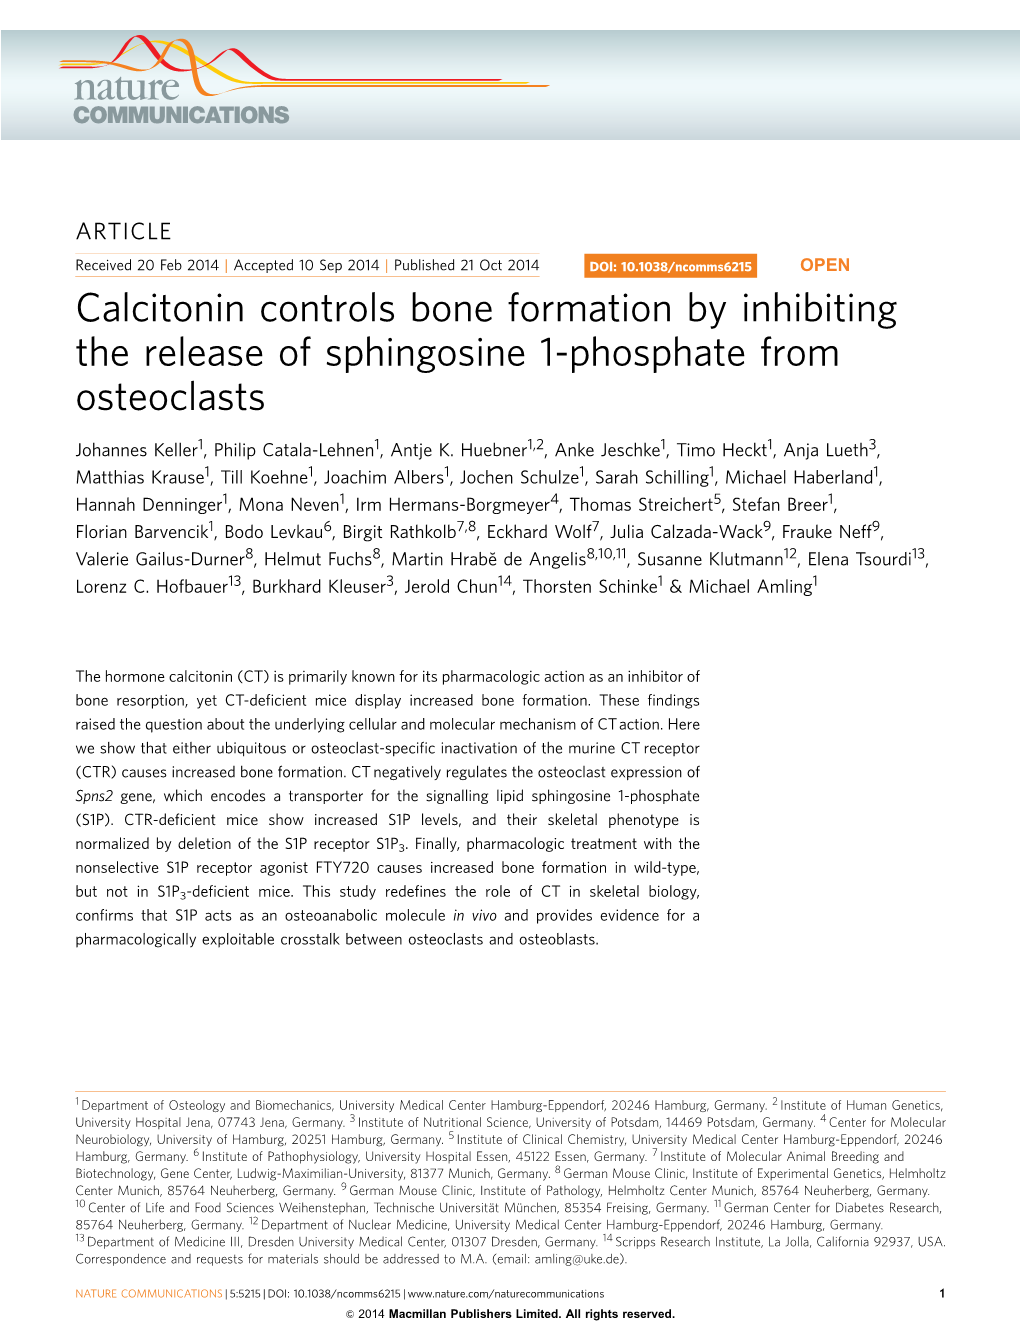 Calcitonin Controls Bone Formation by Inhibiting the Release of Sphingosine 1-Phosphate from Osteoclasts